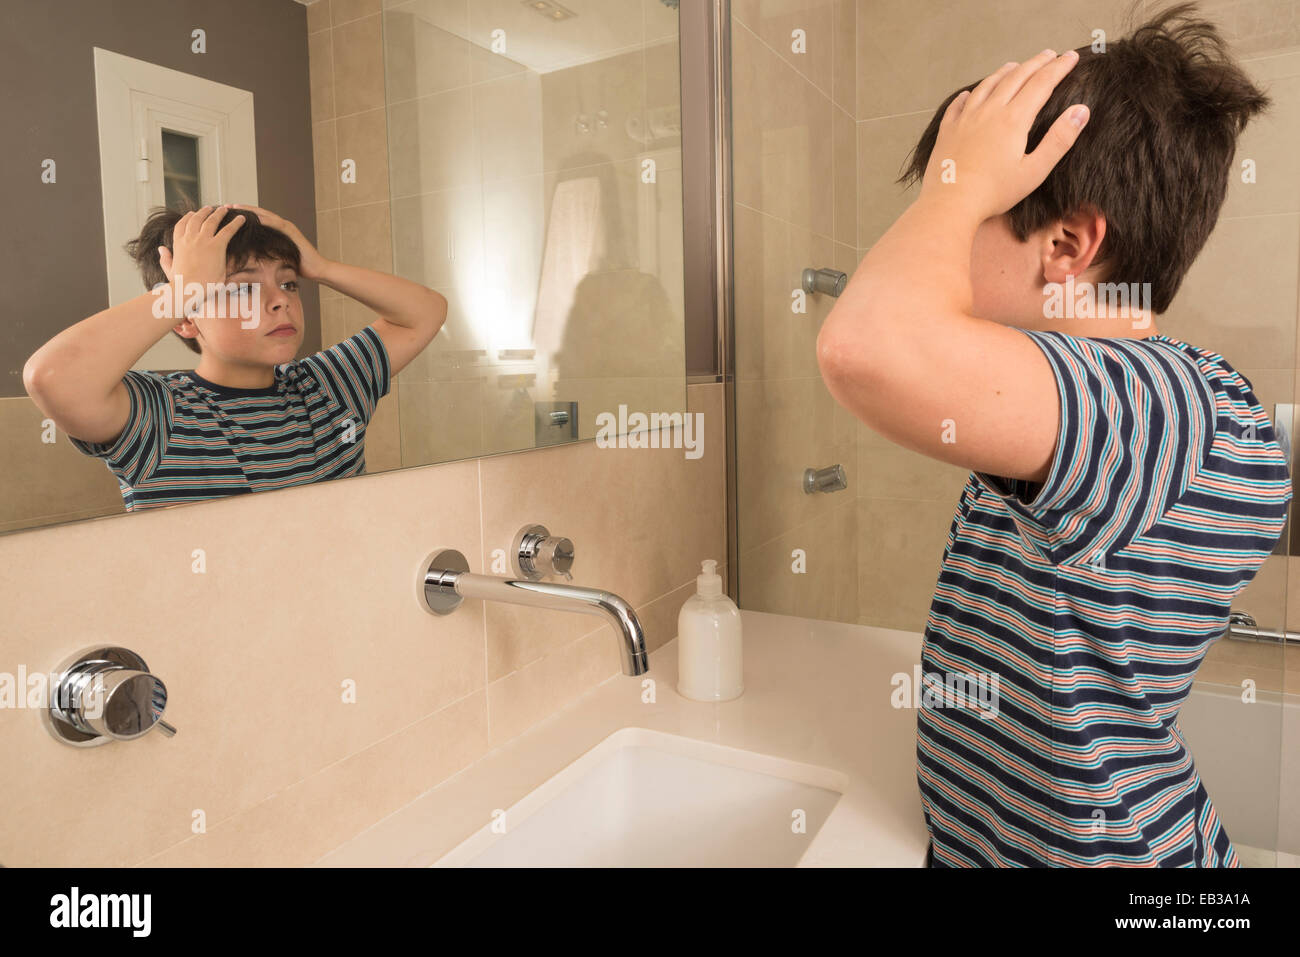 Young boy looking in the mirror in the bathroom Stock Photo